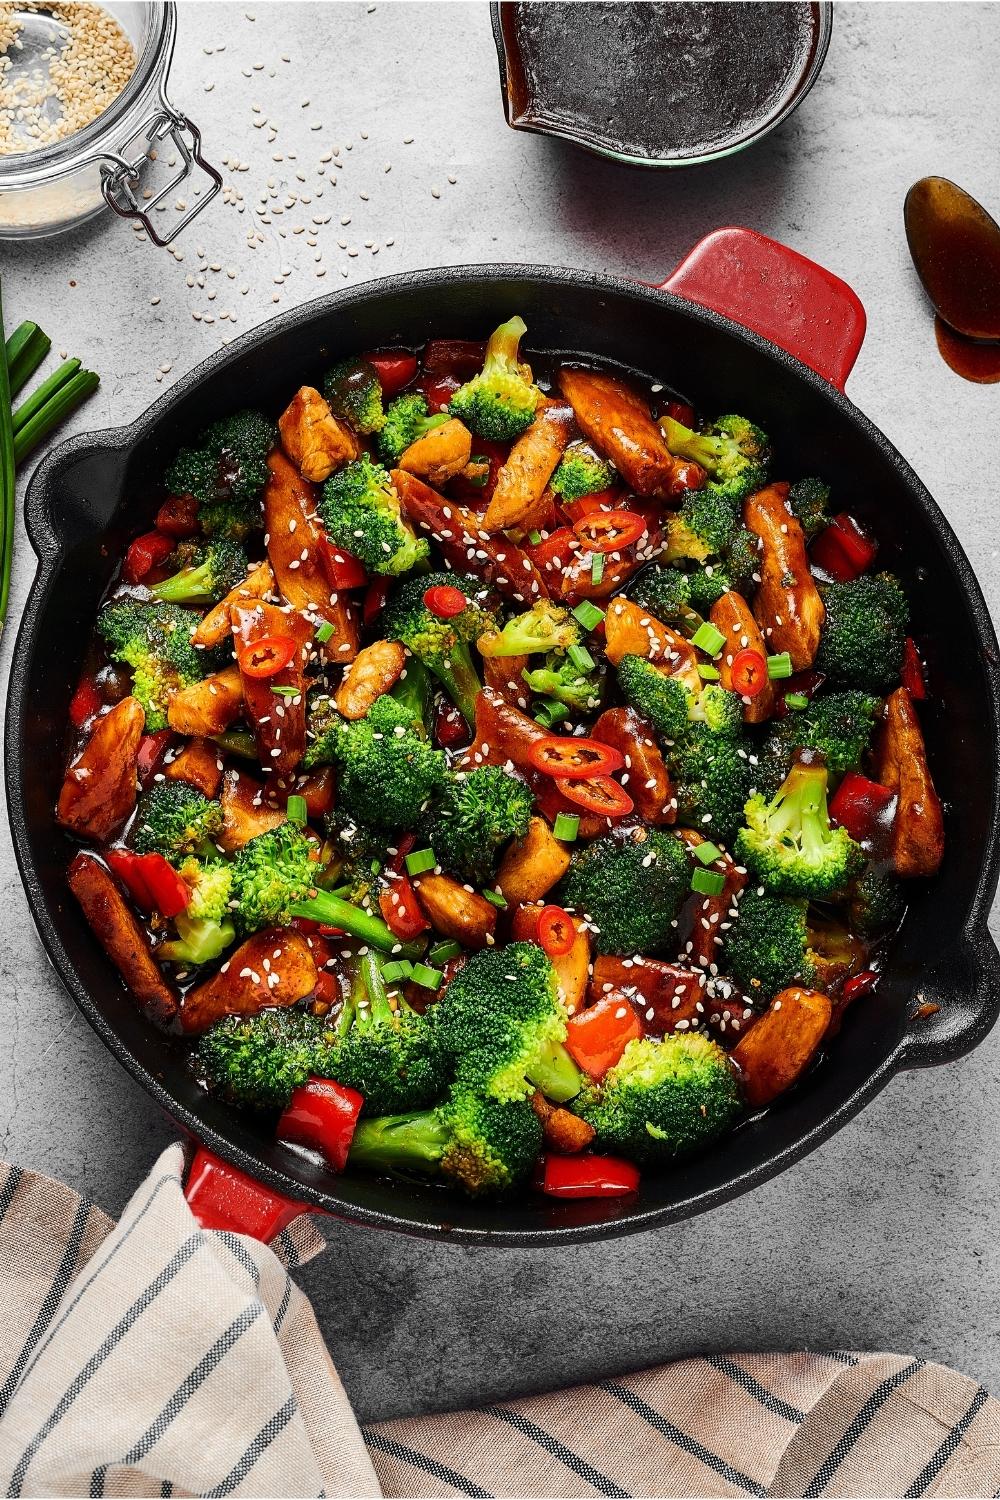 A cast iron pan filled with chicken stir fry.